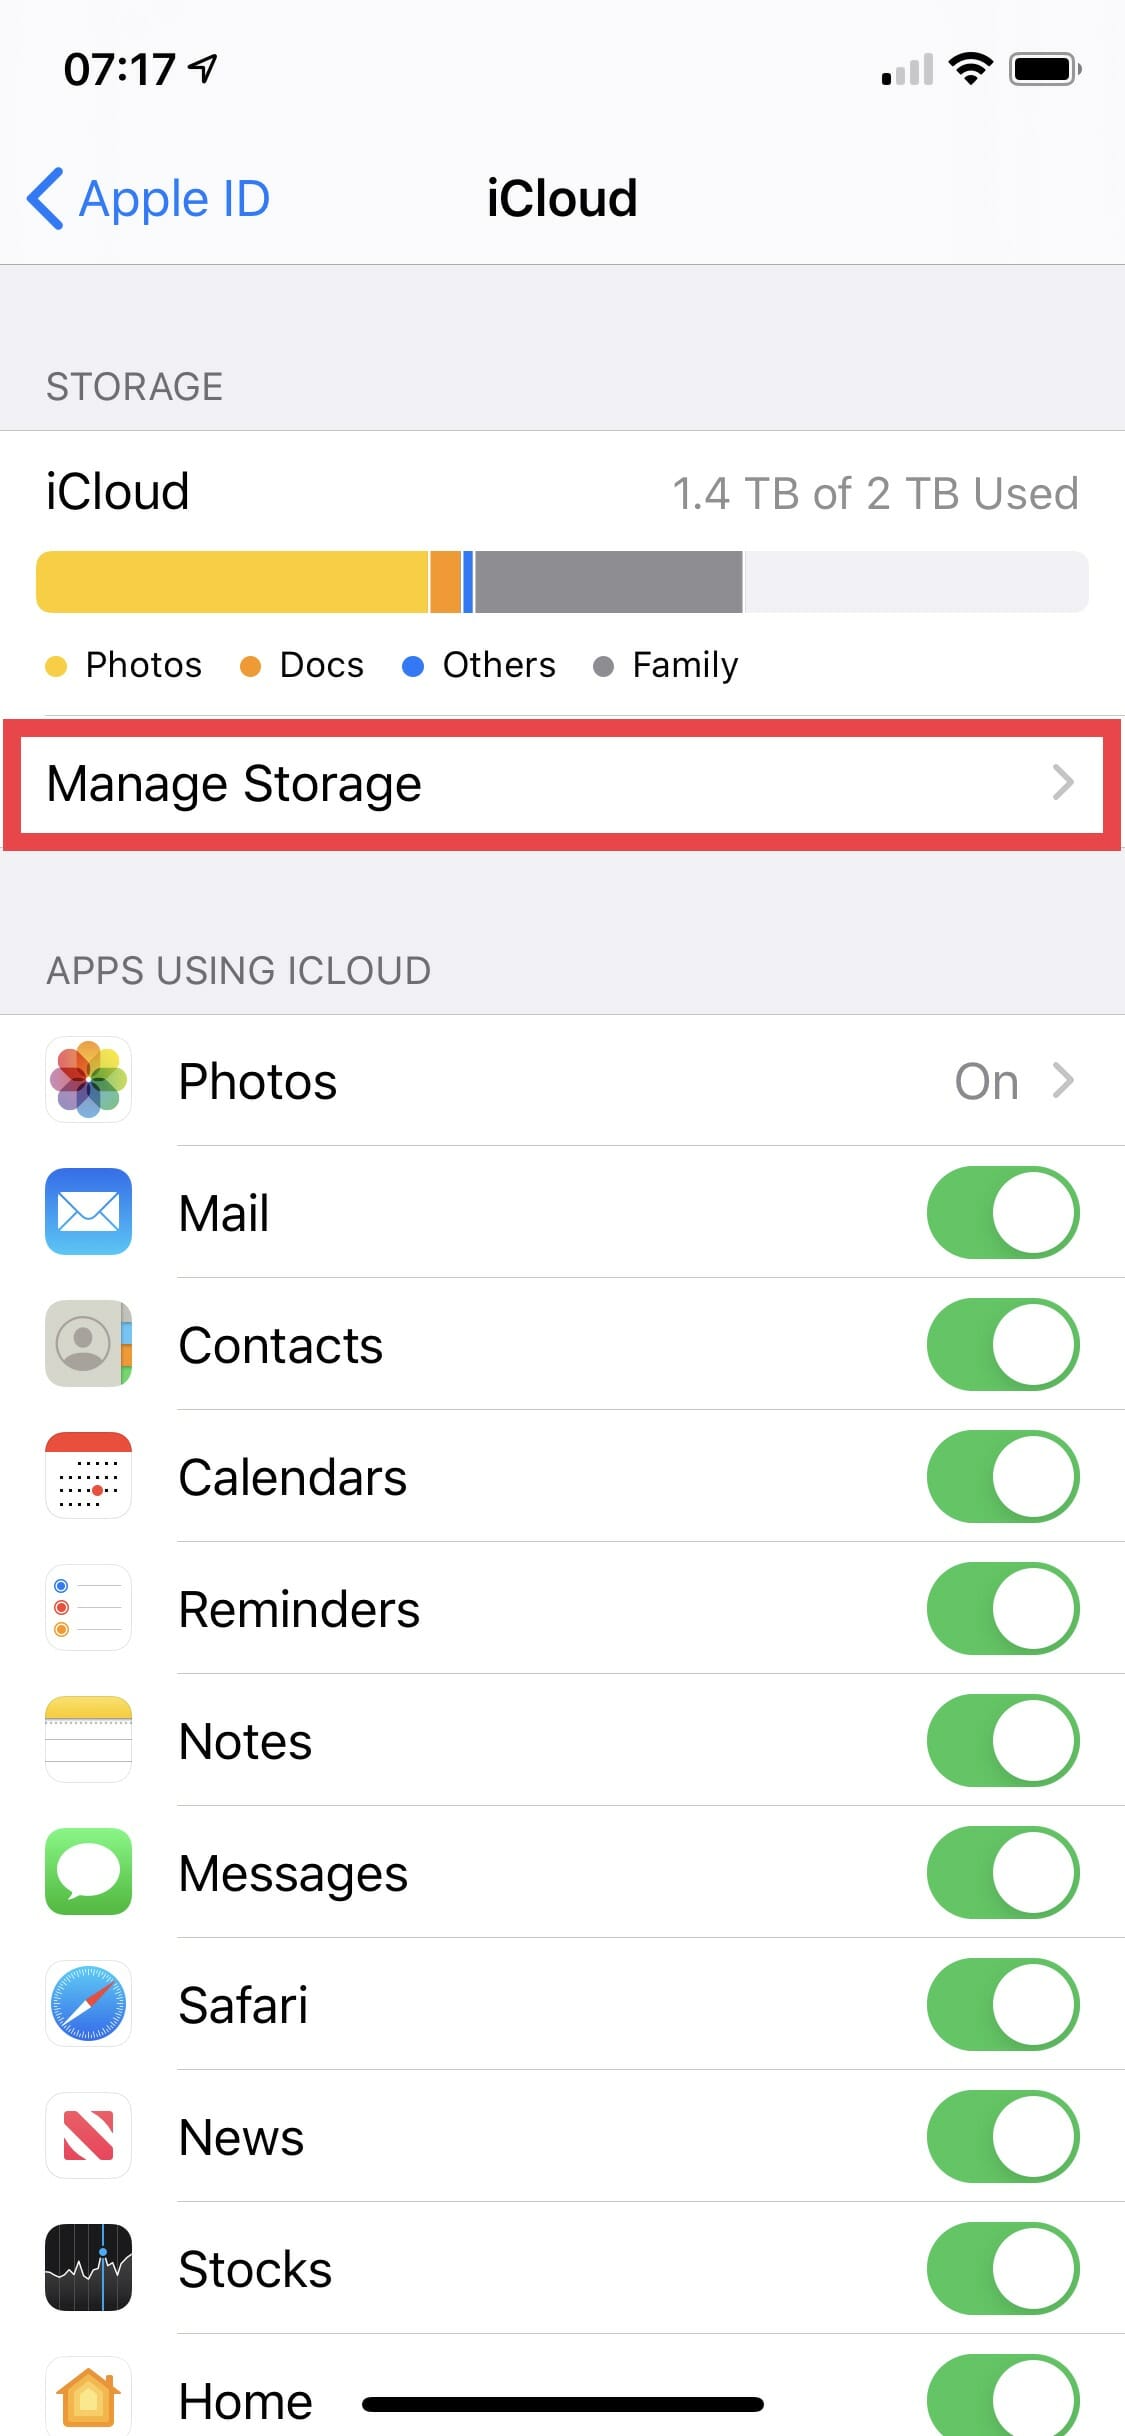 Do not delete photos from an iPhone to free up space